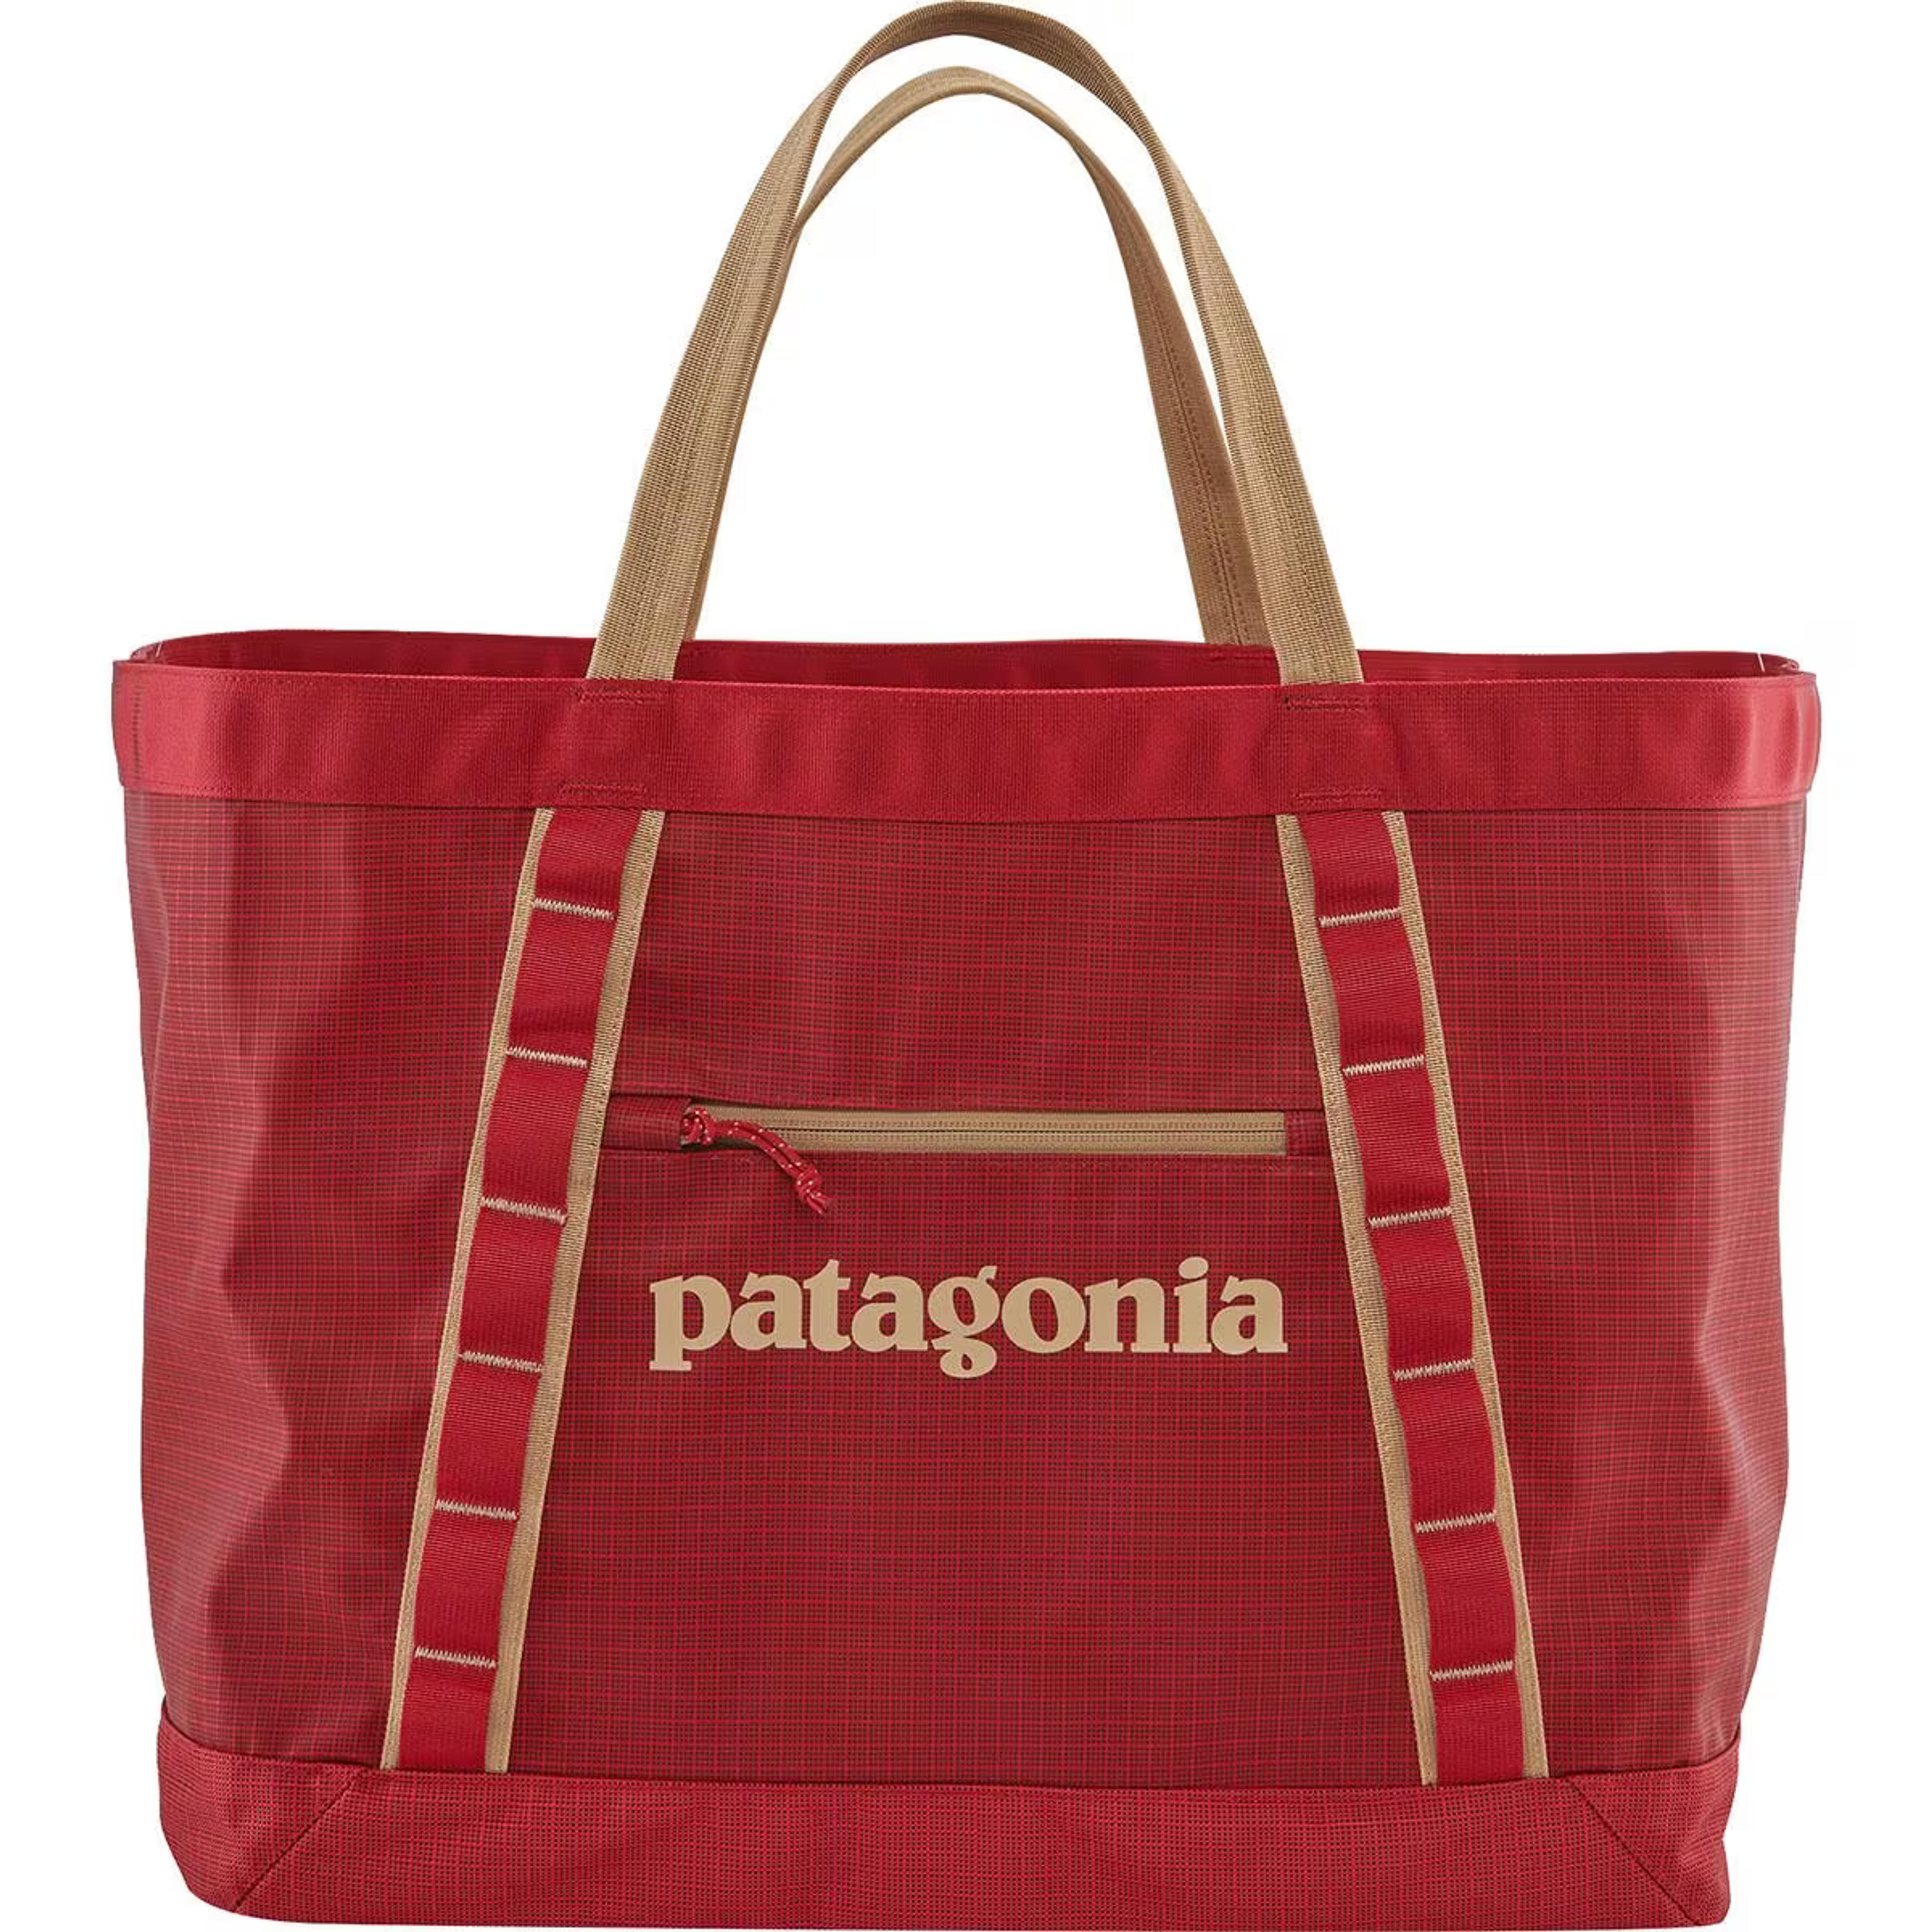 Patagonia Black Hole Gear Tote - Accessories